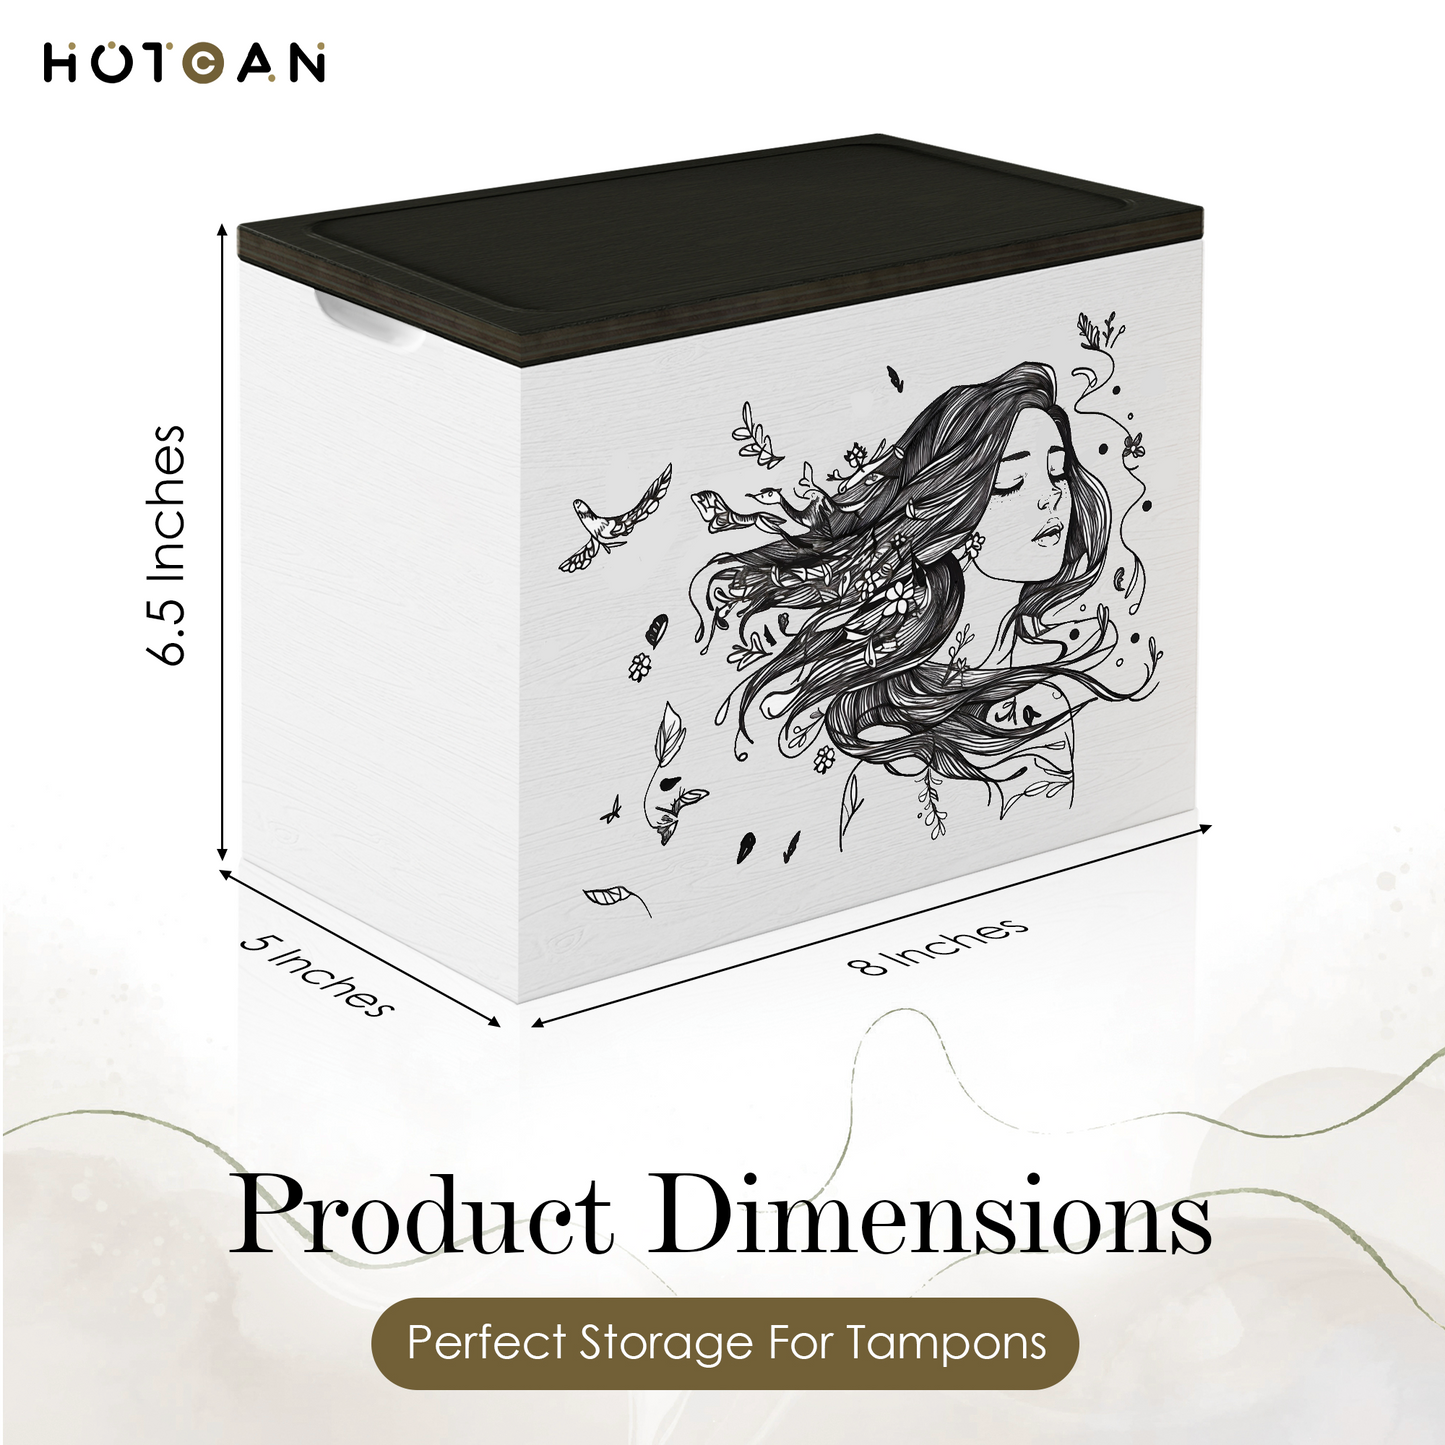 HOTCAN Wooden Tampon Holder for Bathroom - Tampon Organizer with Woman Enjoying the Moment Pattern - Discreet Bathroom Organizer for Private Pad Storage - Gift for Her